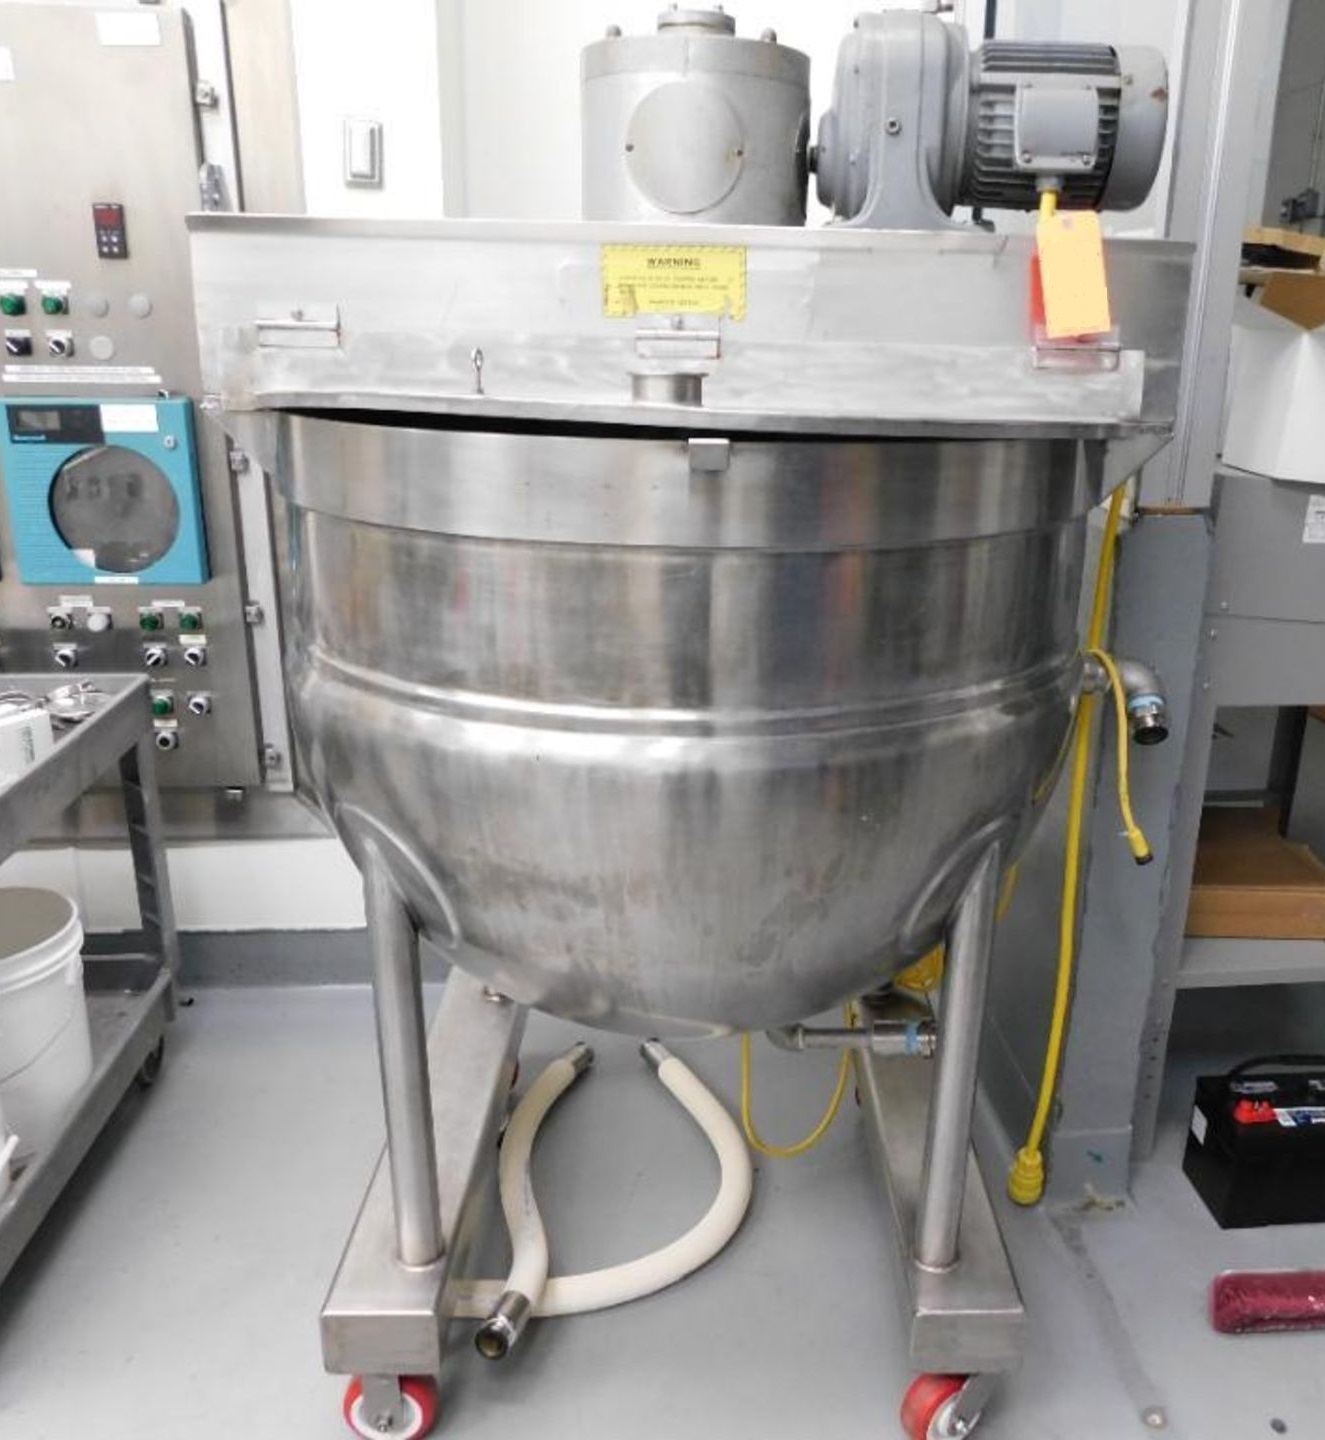 ***SOLD*** 150 Gallon Jacketed Double Motion Mix Kettle.  Built by JC Pardo.  Rated 125 PSI @ 350 Deg.F. Portable on wheels.  Hinged lids.  No scrapper blades installed.  Unit has been tested and is ready to go. Last used in Sanitary Pharmaceutical application.